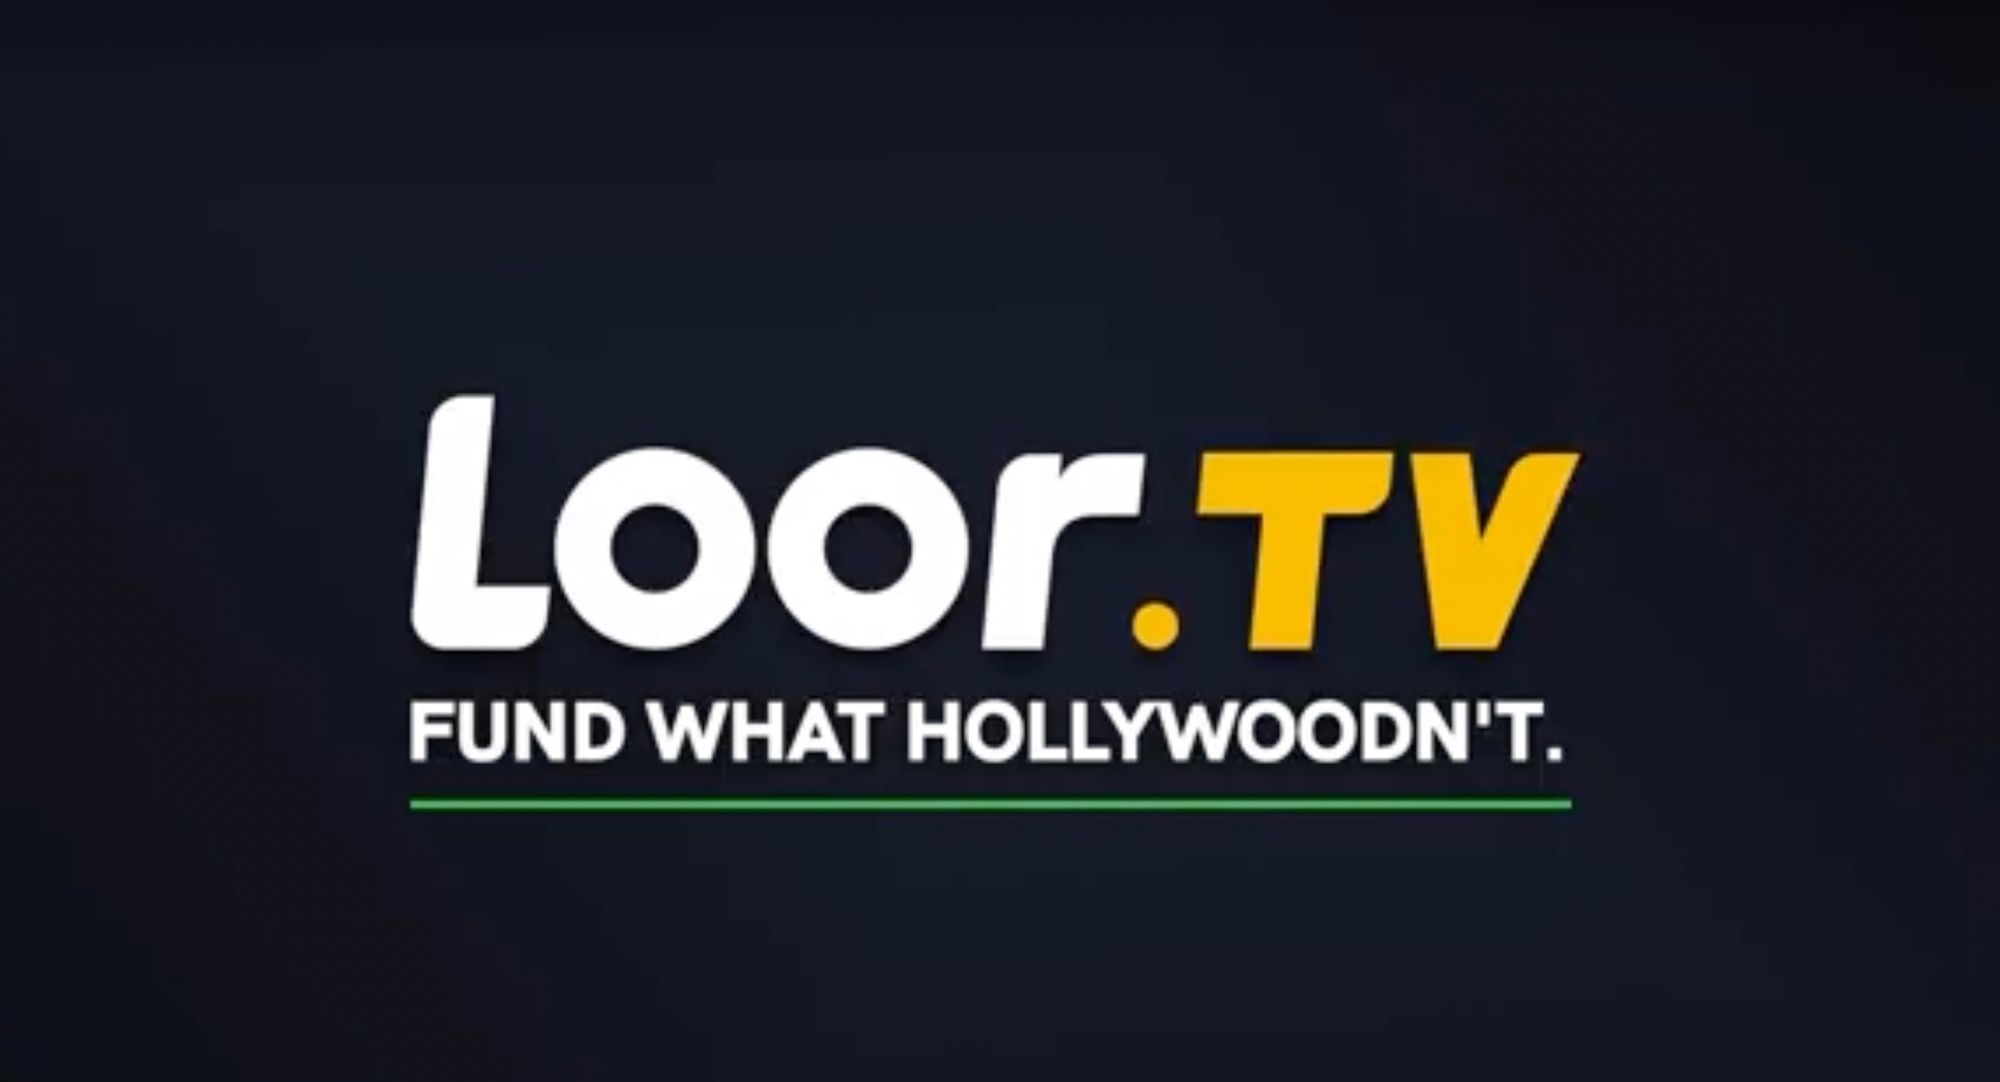 With Success of Angel Studios, Loor.TV Launches New Competitive Streaming Model